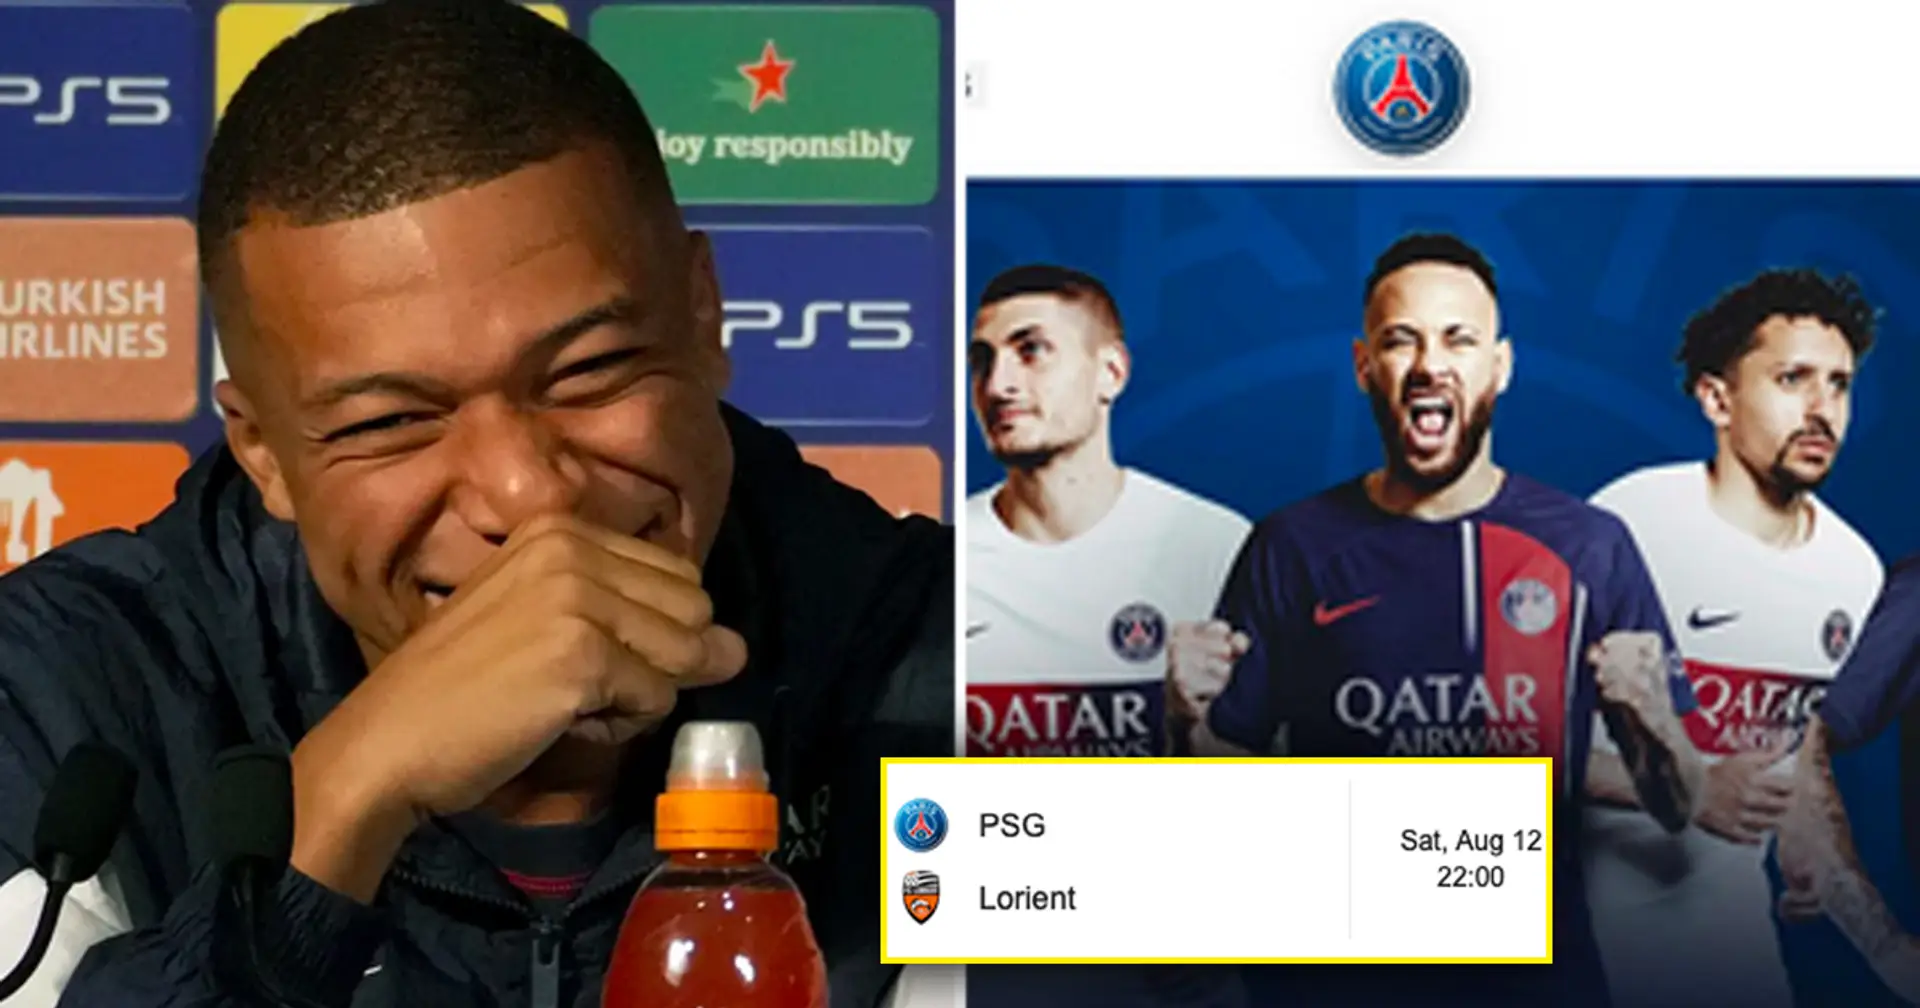 PSG delete Mbappe from website home page, make decision on his Ligue 1 participation